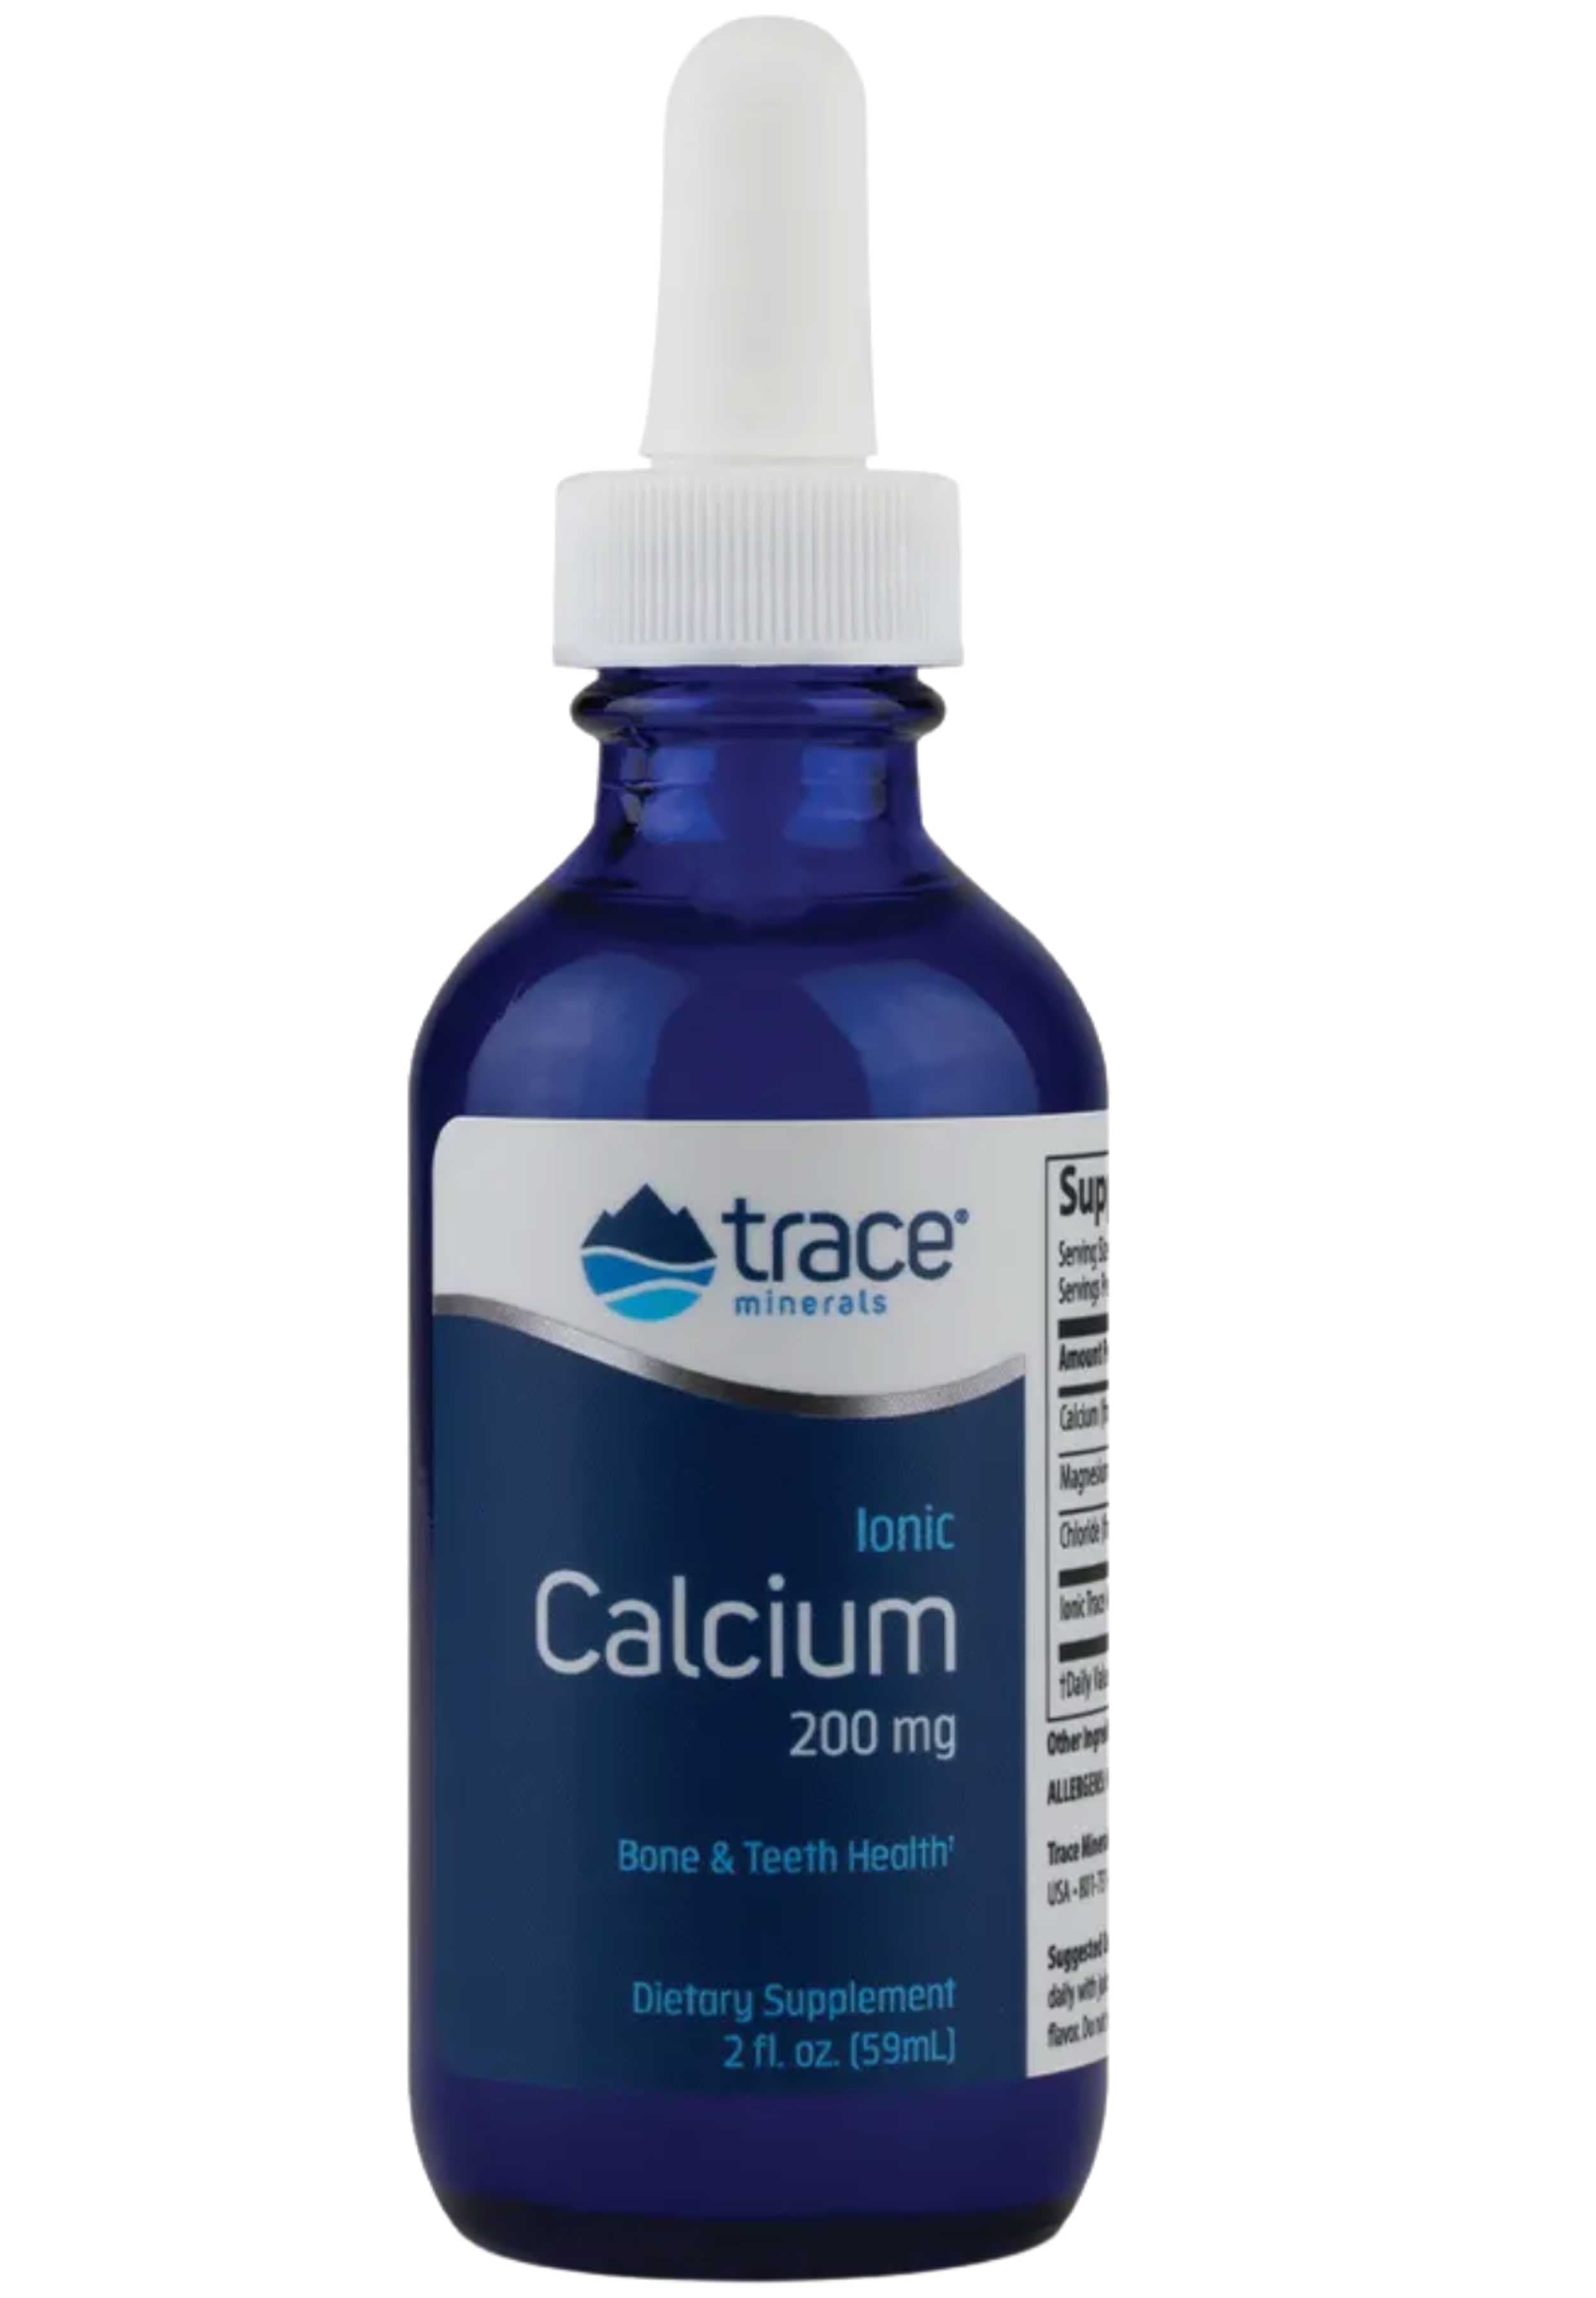 Trace Minerals Research Ionic Calcium